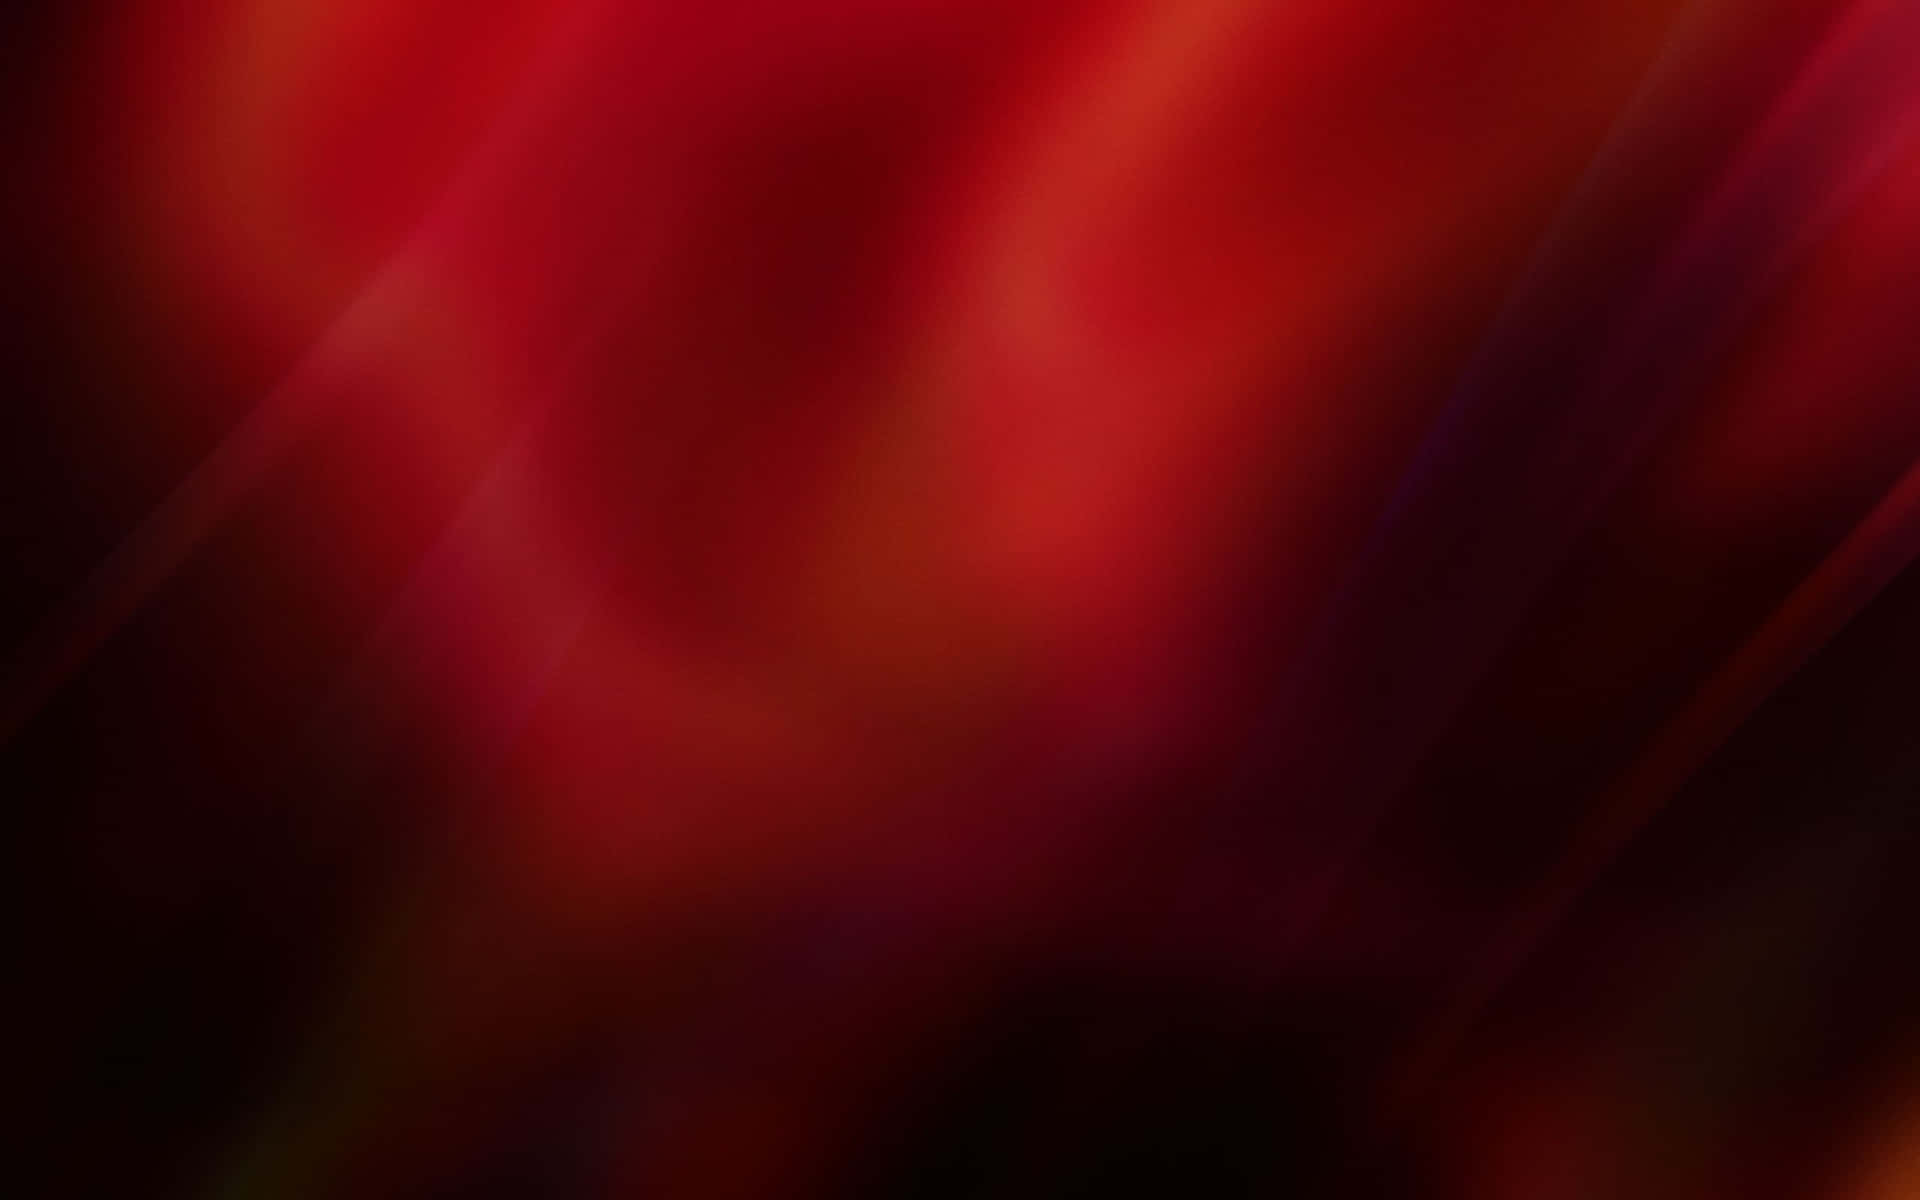 A Red Abstract Background With A Blurred Background